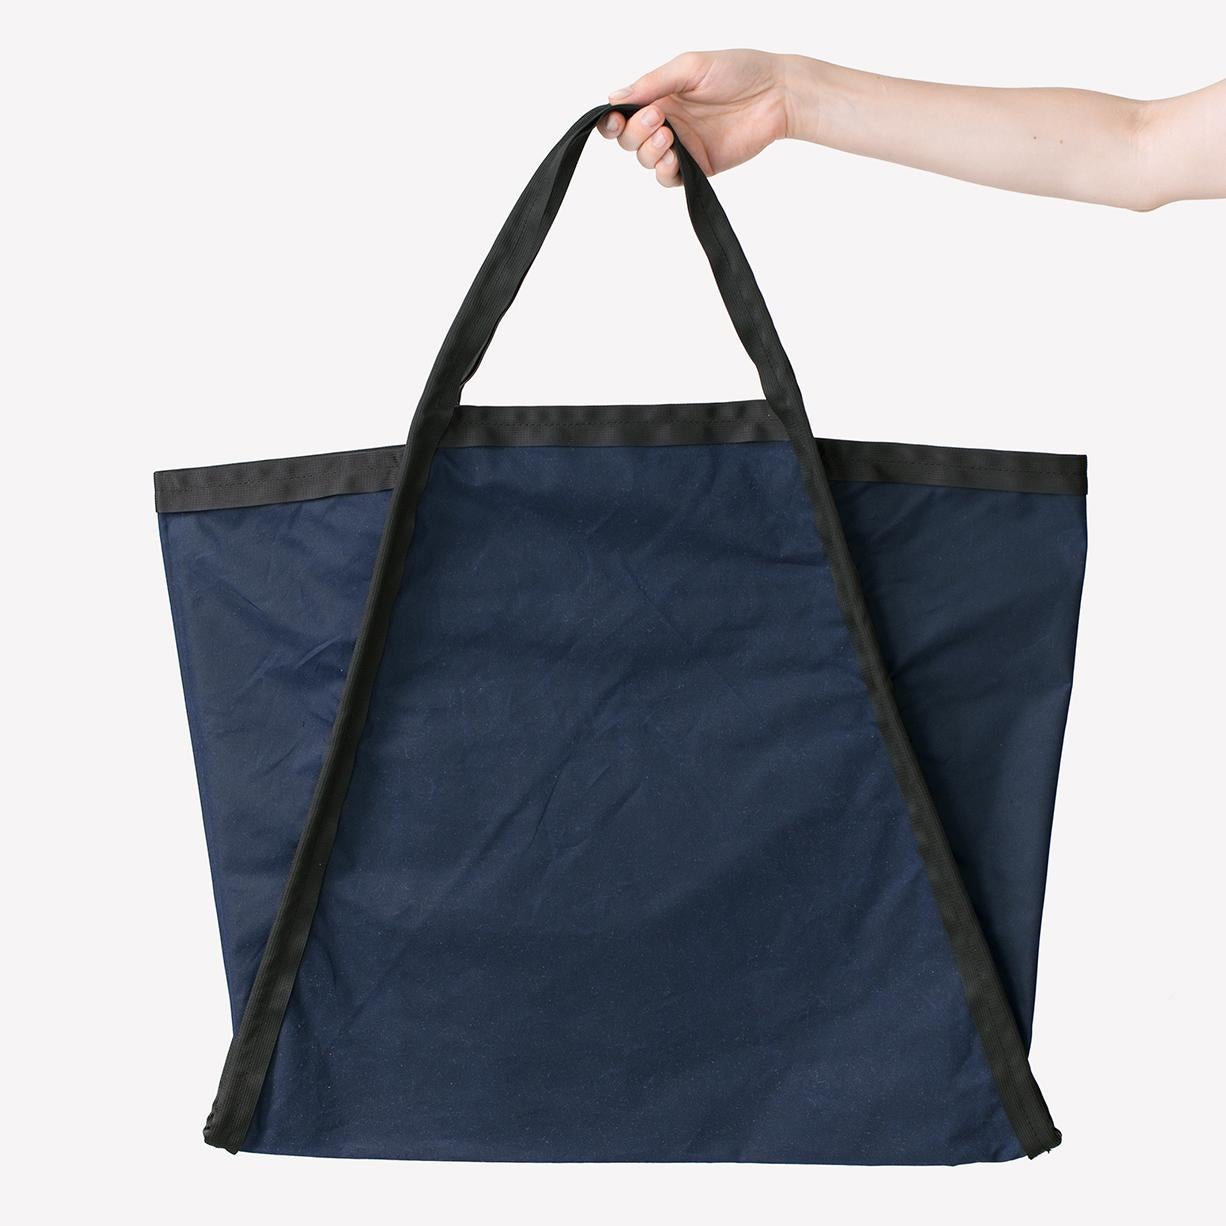 Maharam Bag
Three Large by Konstantin Grcic 
003 Indigo/Black

Konstantin Grcic (b. 1965, Germany) is a Munich-based industrial designer who combines deep research with an investigation into emerging technologies. He trained as a cabinetmaker before